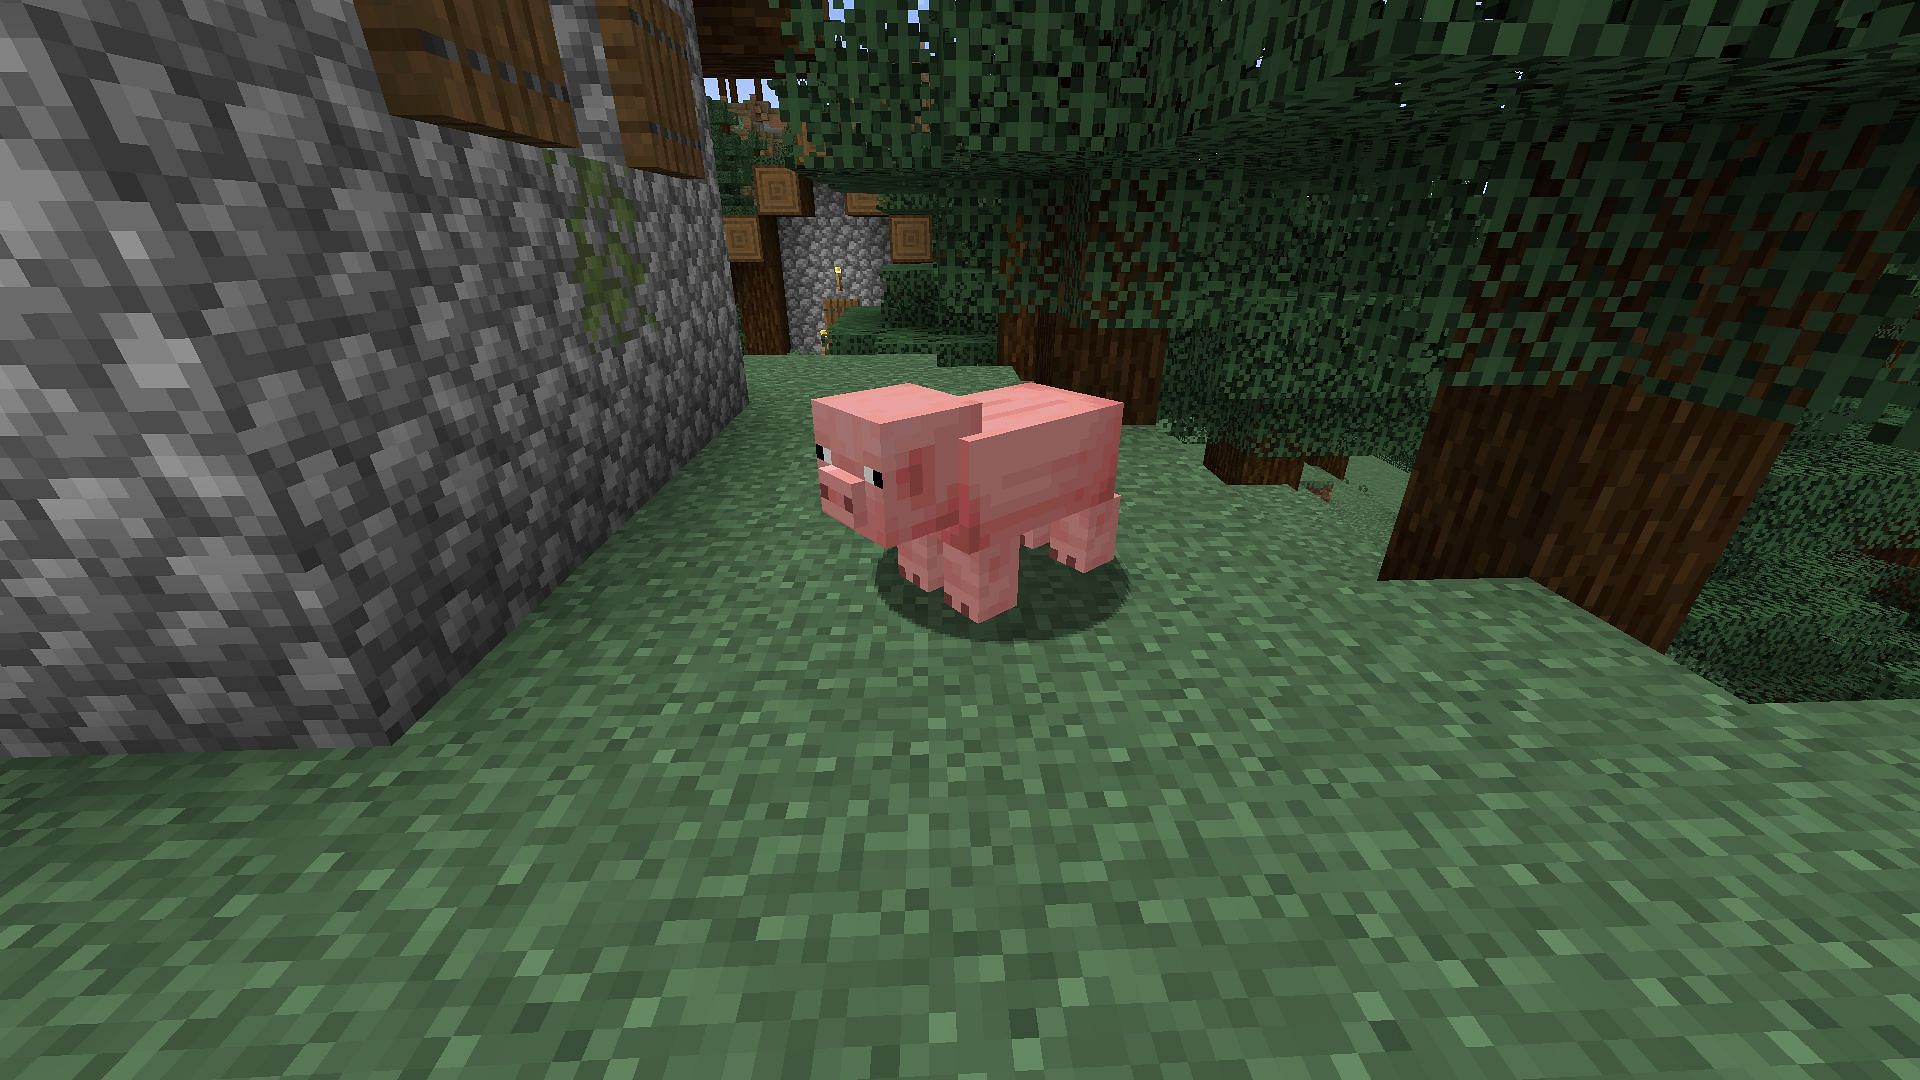 Pigs drop raw pork that can be cooked and consumed in Minecraft 1.19 (Image via Mojang)